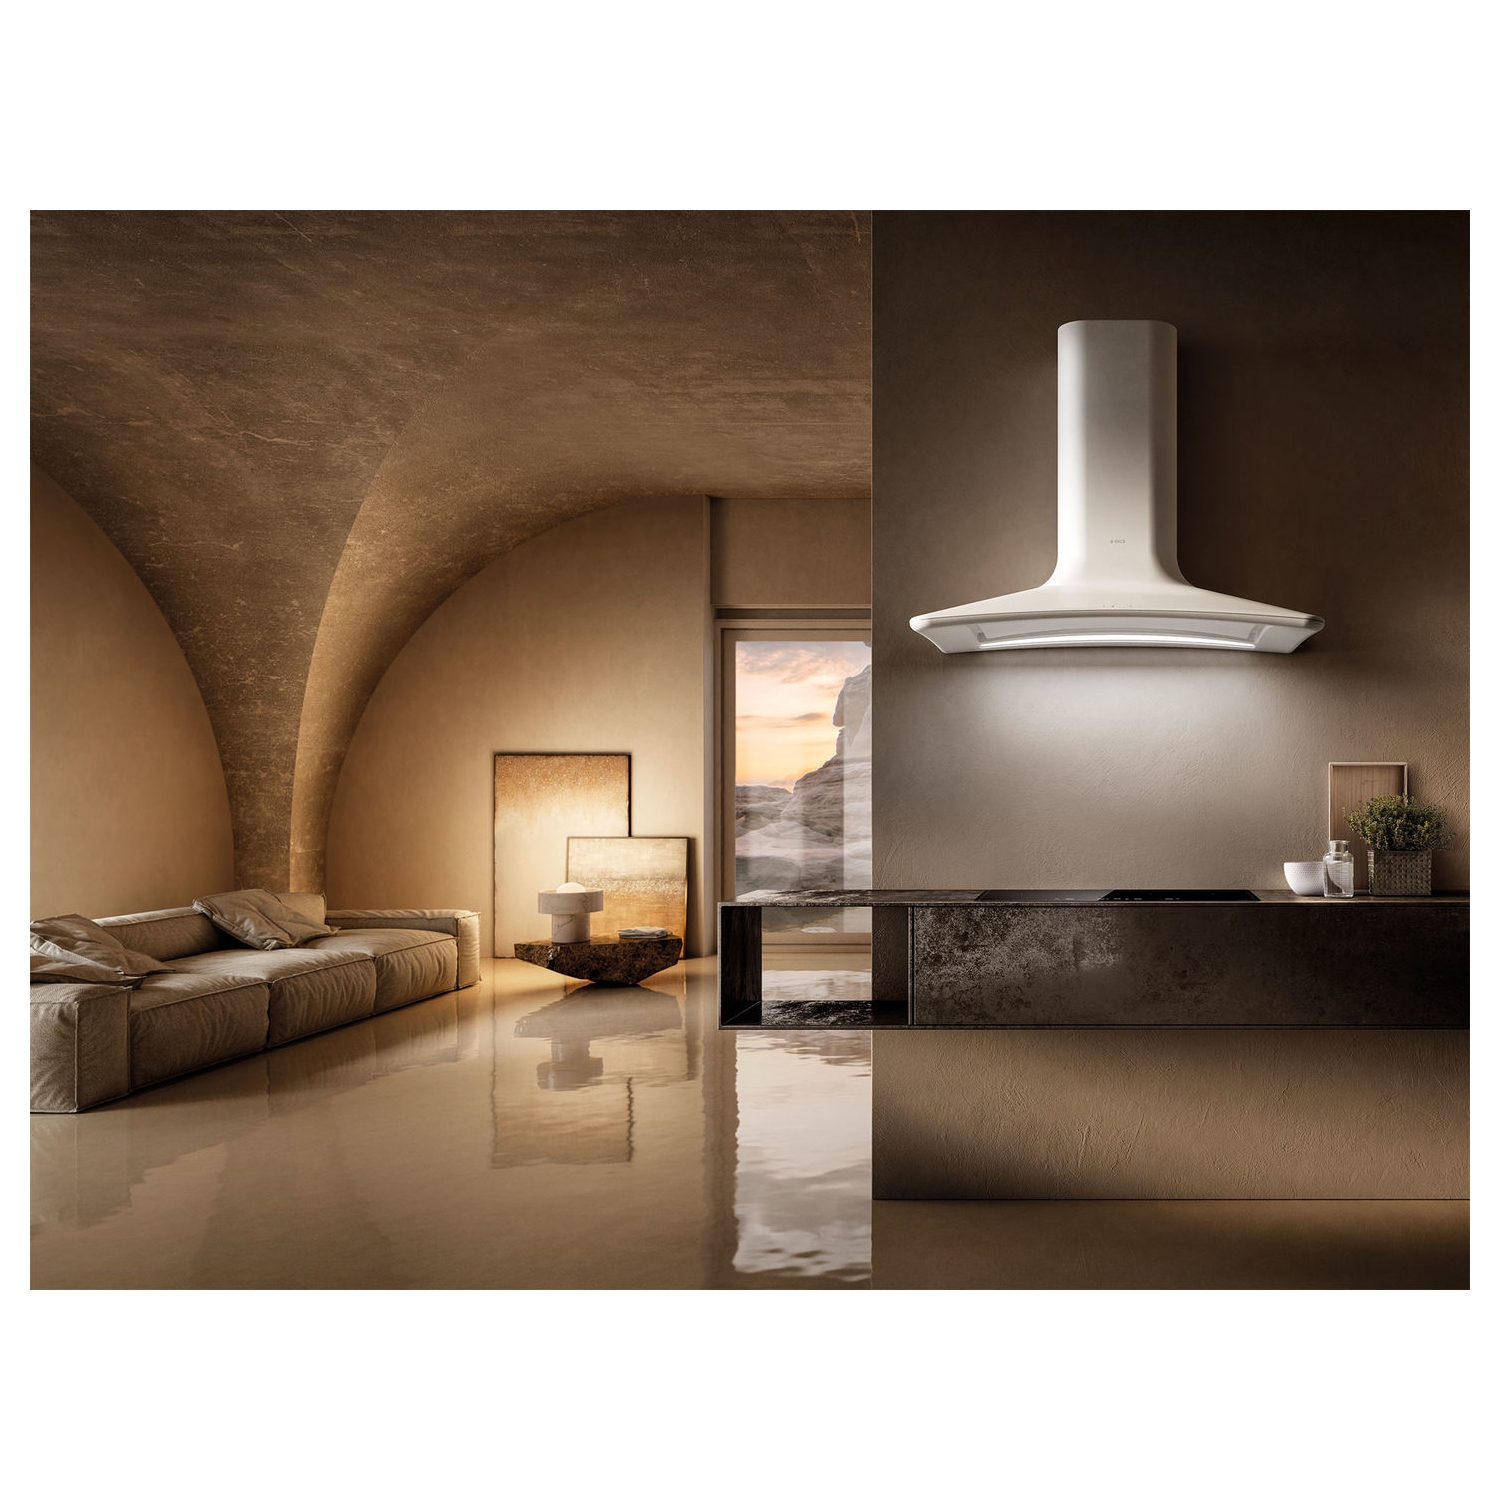 Elica - Wall Mounted Dolce Cooker Hood - 2